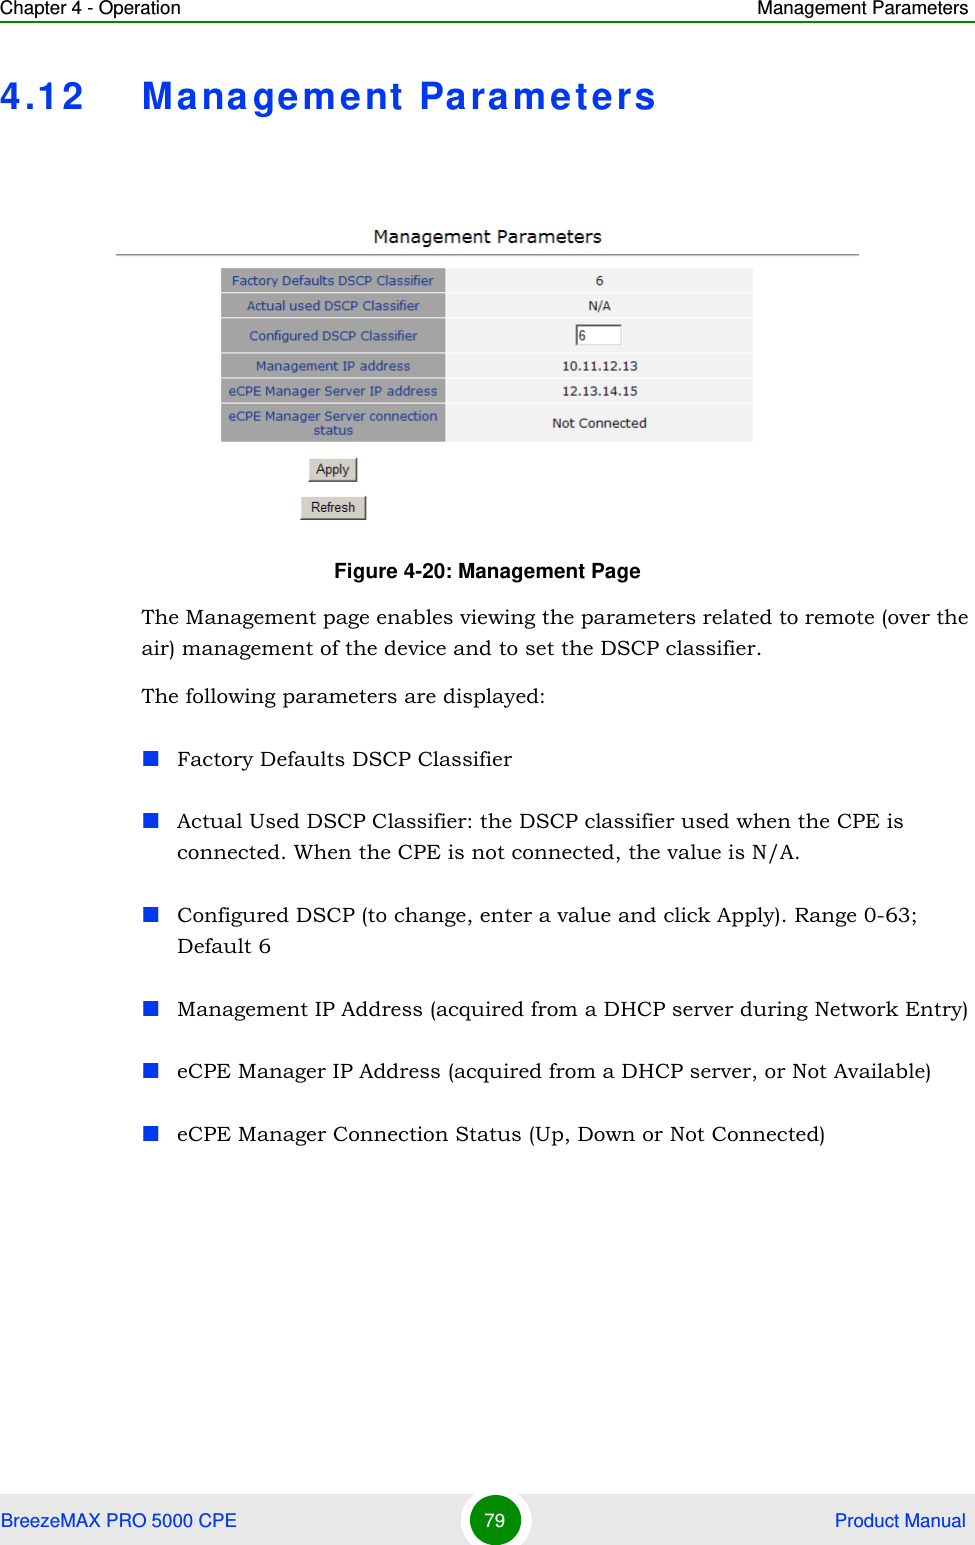 Chapter 4 - Operation Management ParametersBreezeMAX PRO 5000 CPE 79  Product Manual4.12 Management ParametersThe Management page enables viewing the parameters related to remote (over the air) management of the device and to set the DSCP classifier.The following parameters are displayed:Factory Defaults DSCP ClassifierActual Used DSCP Classifier: the DSCP classifier used when the CPE is connected. When the CPE is not connected, the value is N/A.Configured DSCP (to change, enter a value and click Apply). Range 0-63; Default 6Management IP Address (acquired from a DHCP server during Network Entry)eCPE Manager IP Address (acquired from a DHCP server, or Not Available)eCPE Manager Connection Status (Up, Down or Not Connected)Figure 4-20: Management Page